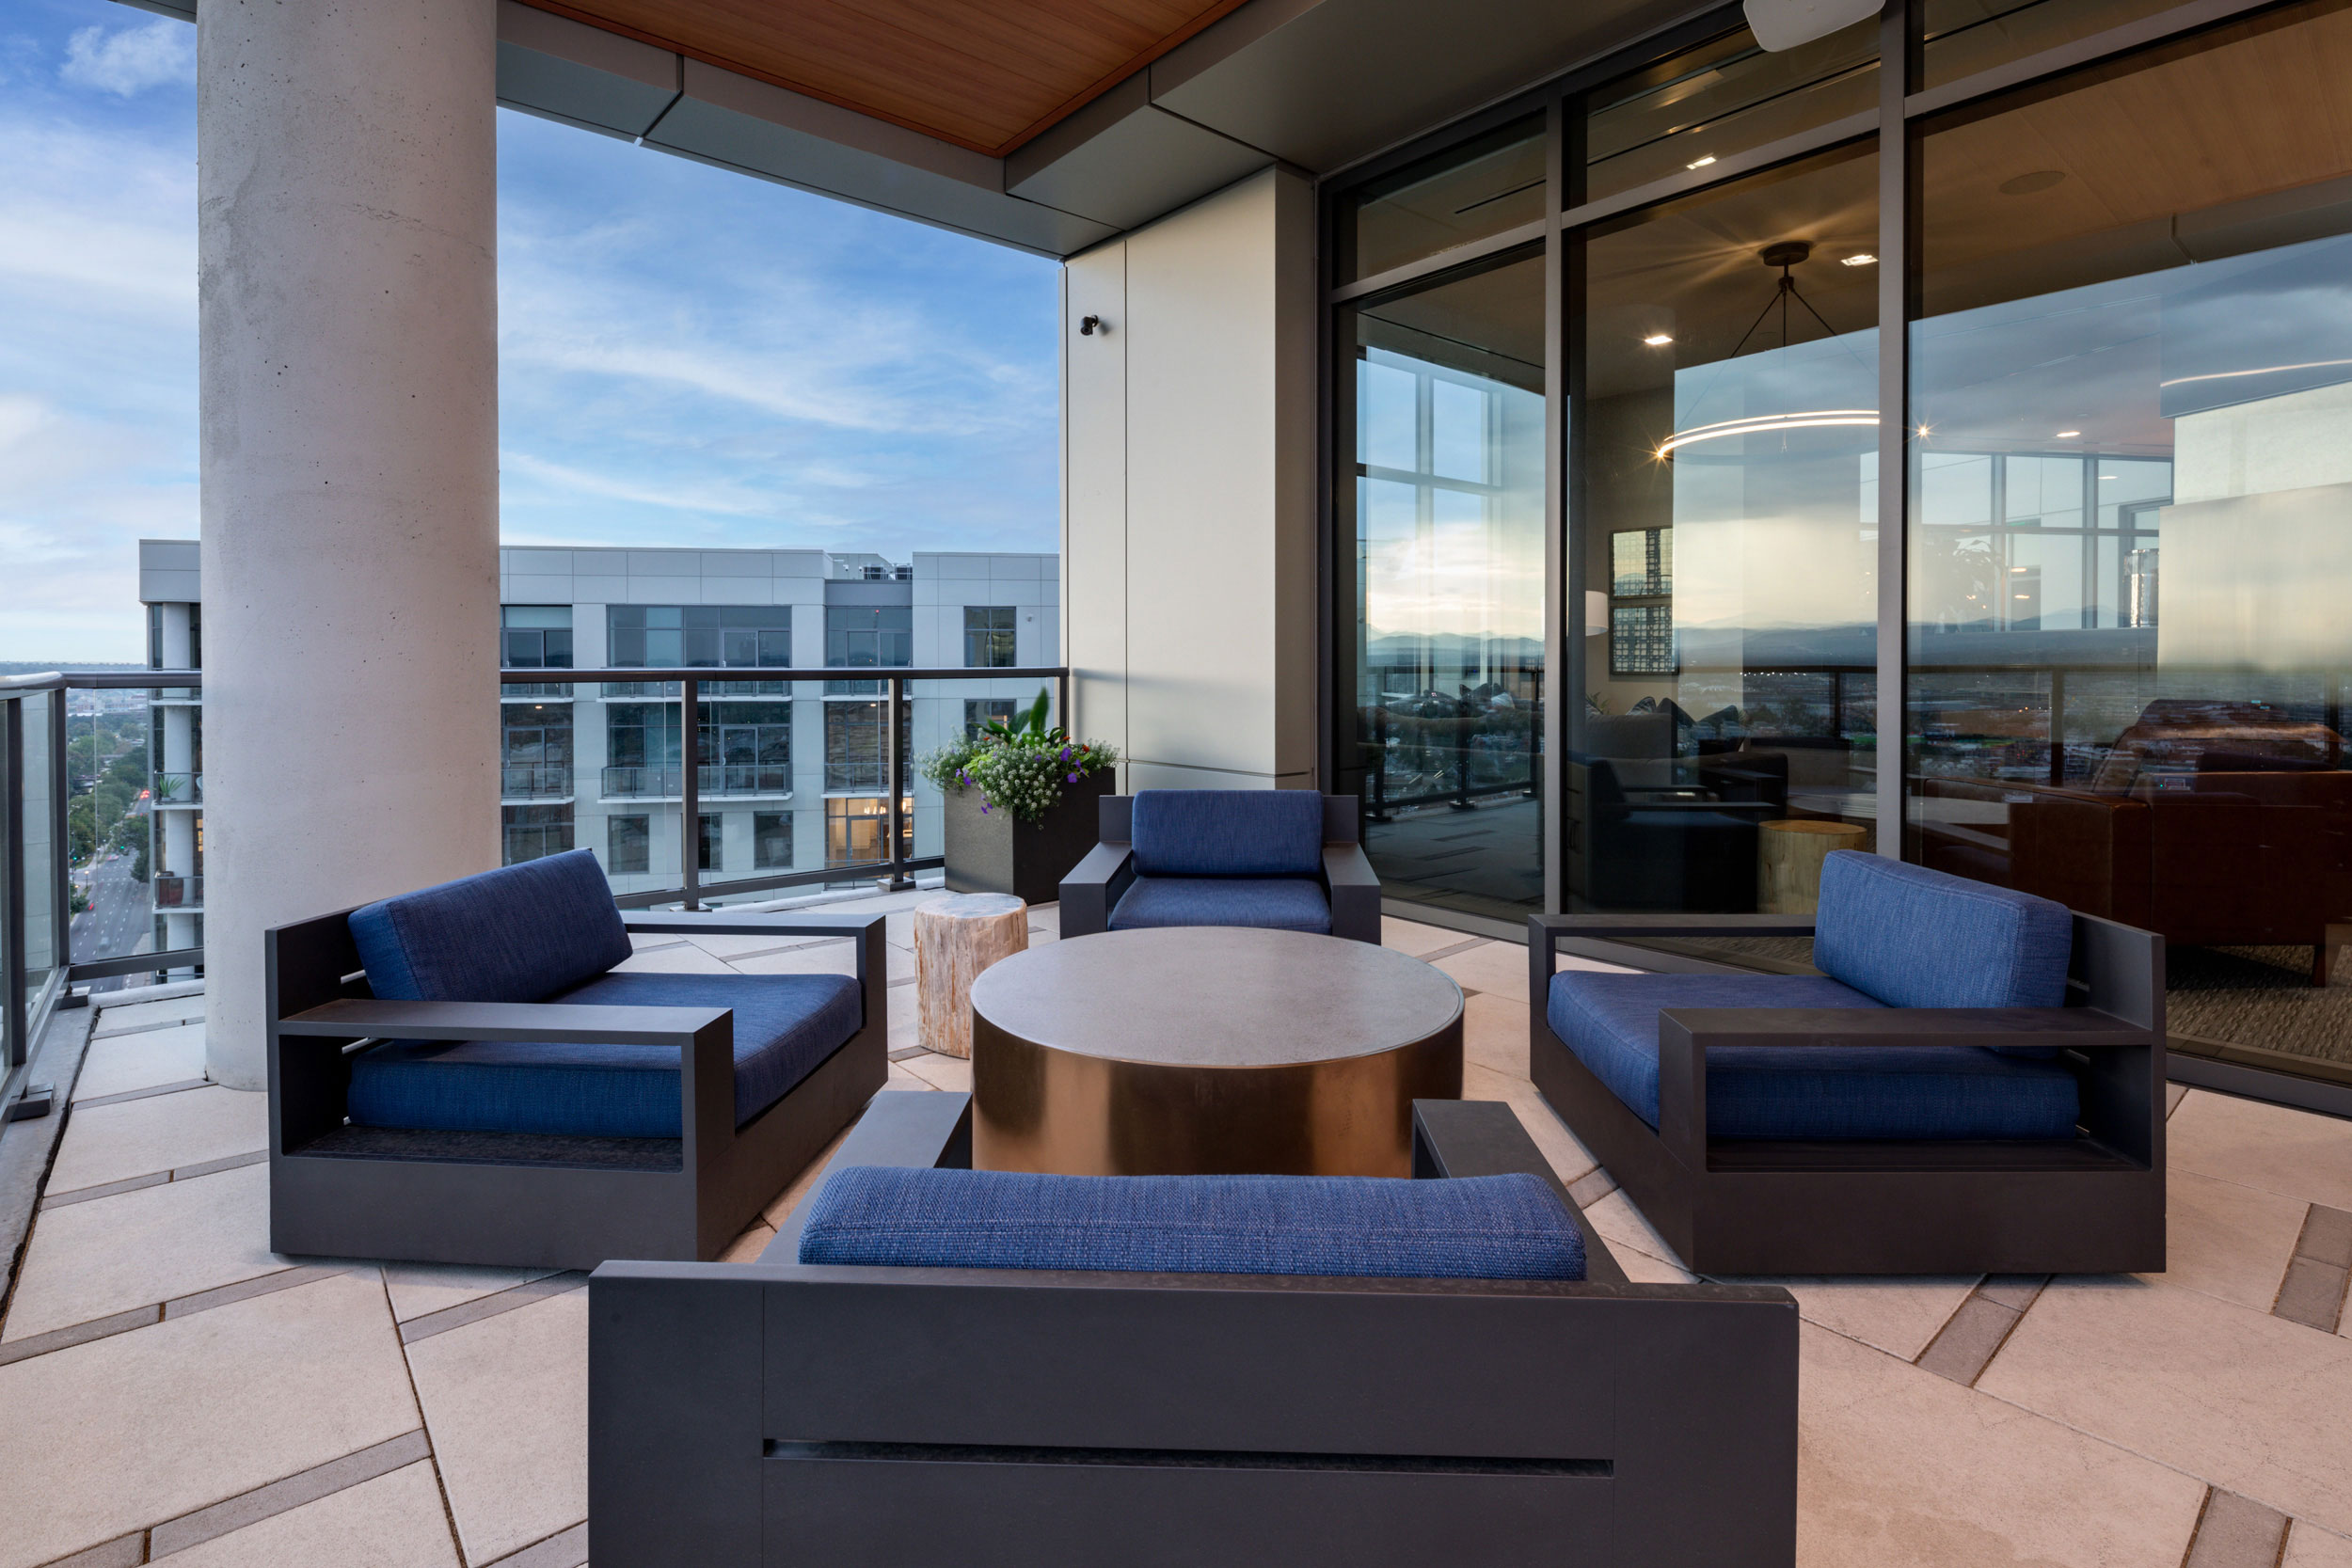 Balcony sitting area at the luxury living high-rise of Parq on Speer